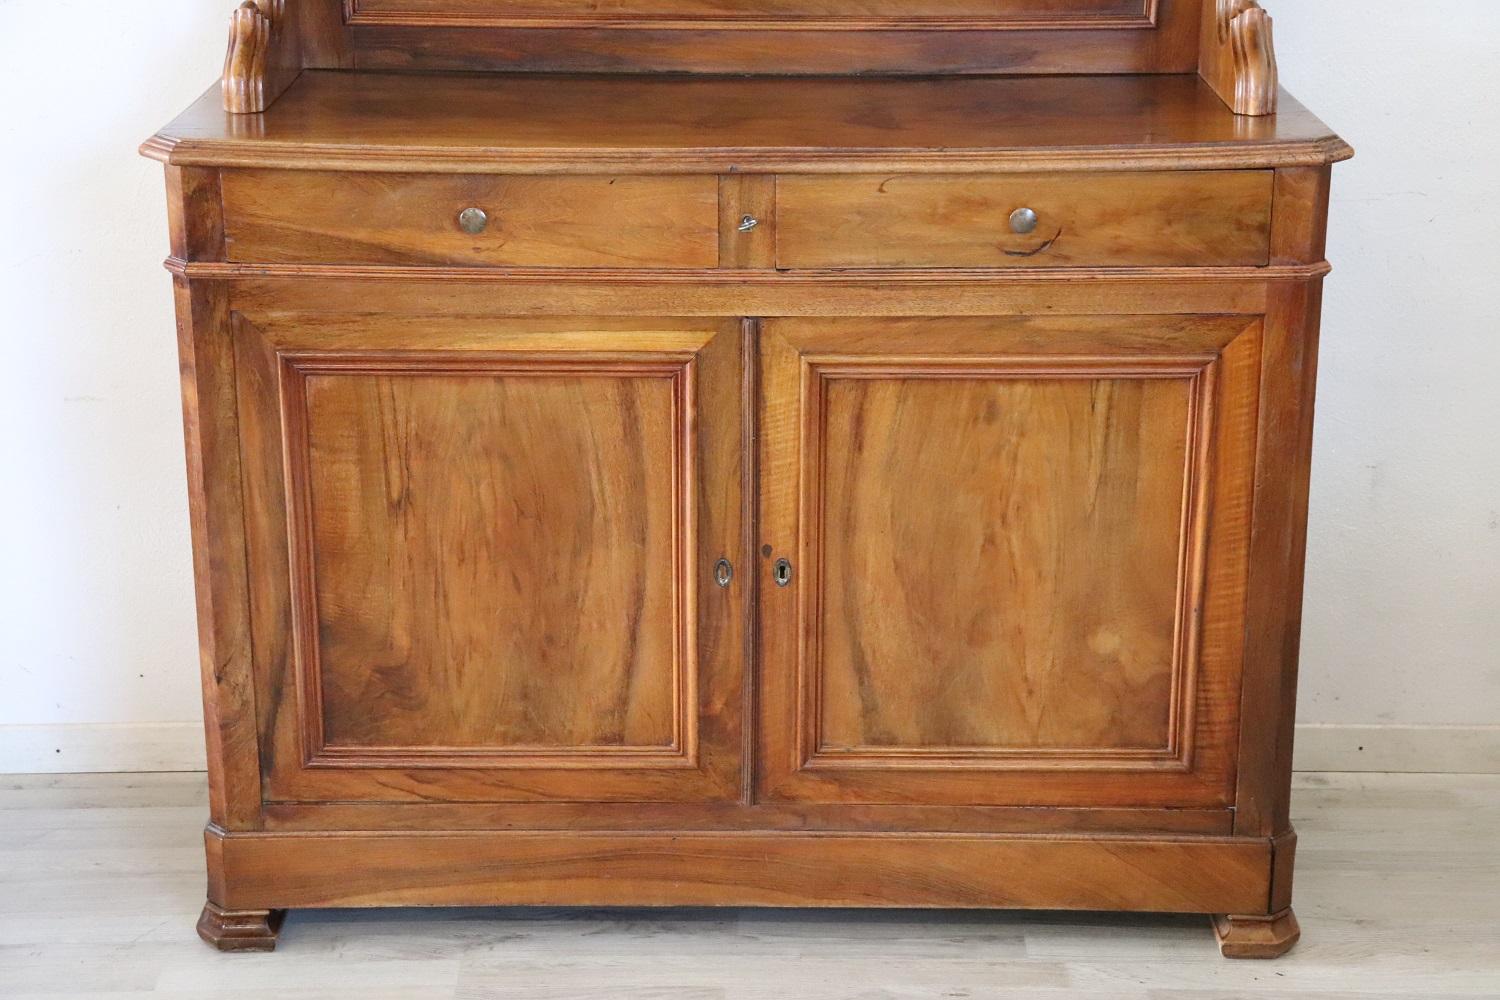 Antique Italian sideboard 1850 in solid walnut wood of a beautiful antique patina! It is divided into two parts for a practical transport. Equipped with two shelves in the upper part and one in the lower part. The shelves can be moved to the desired